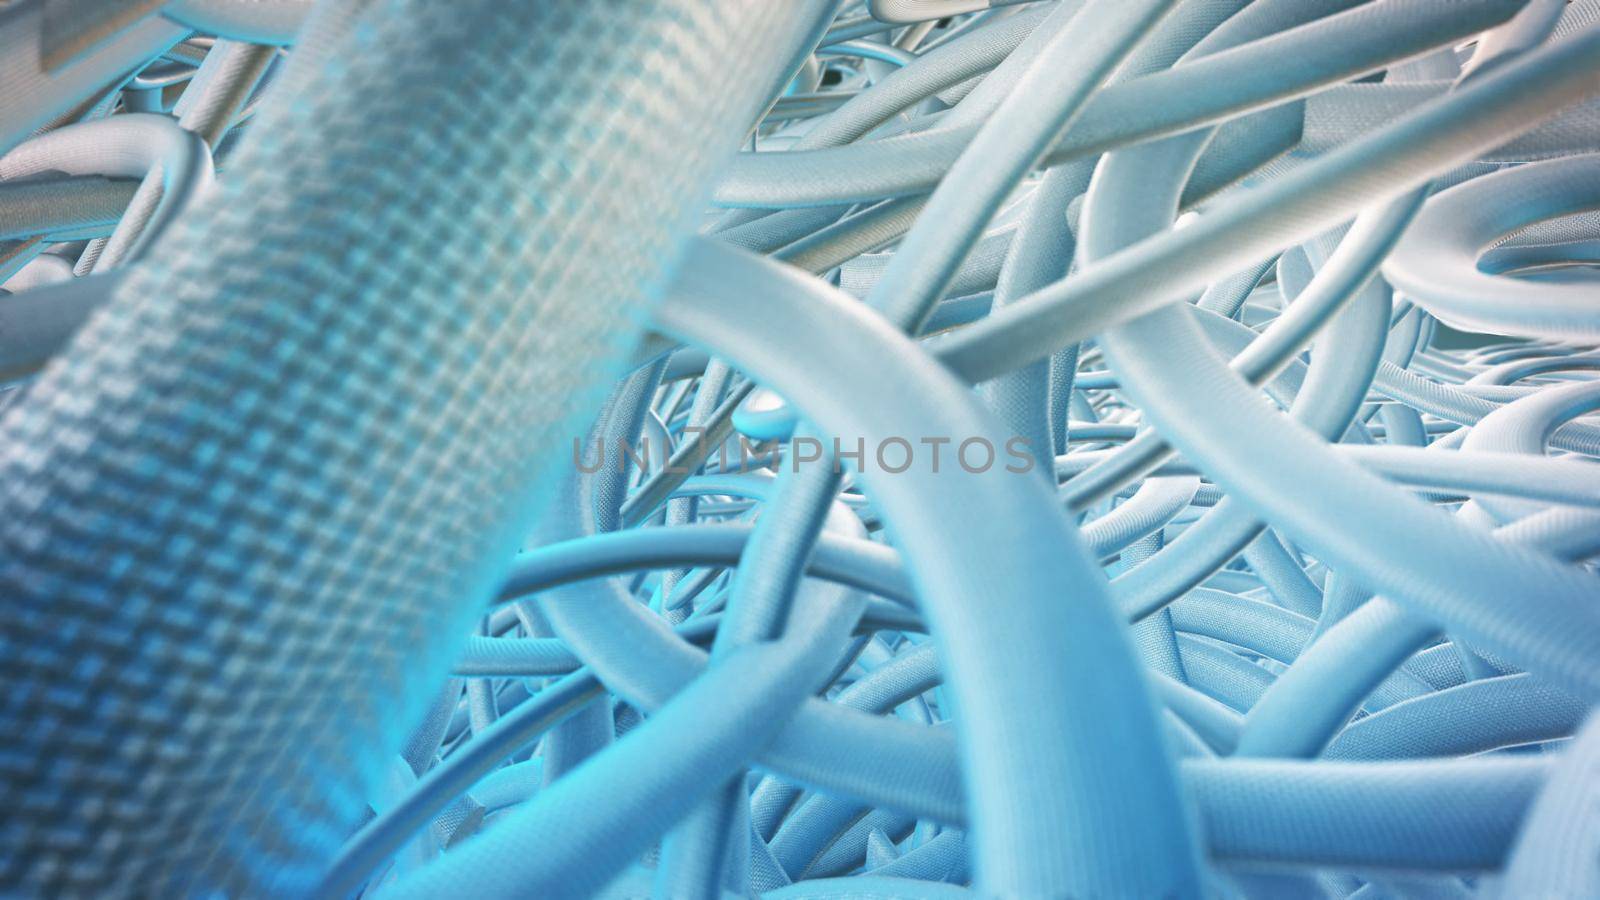 CGI graphics with blue cable